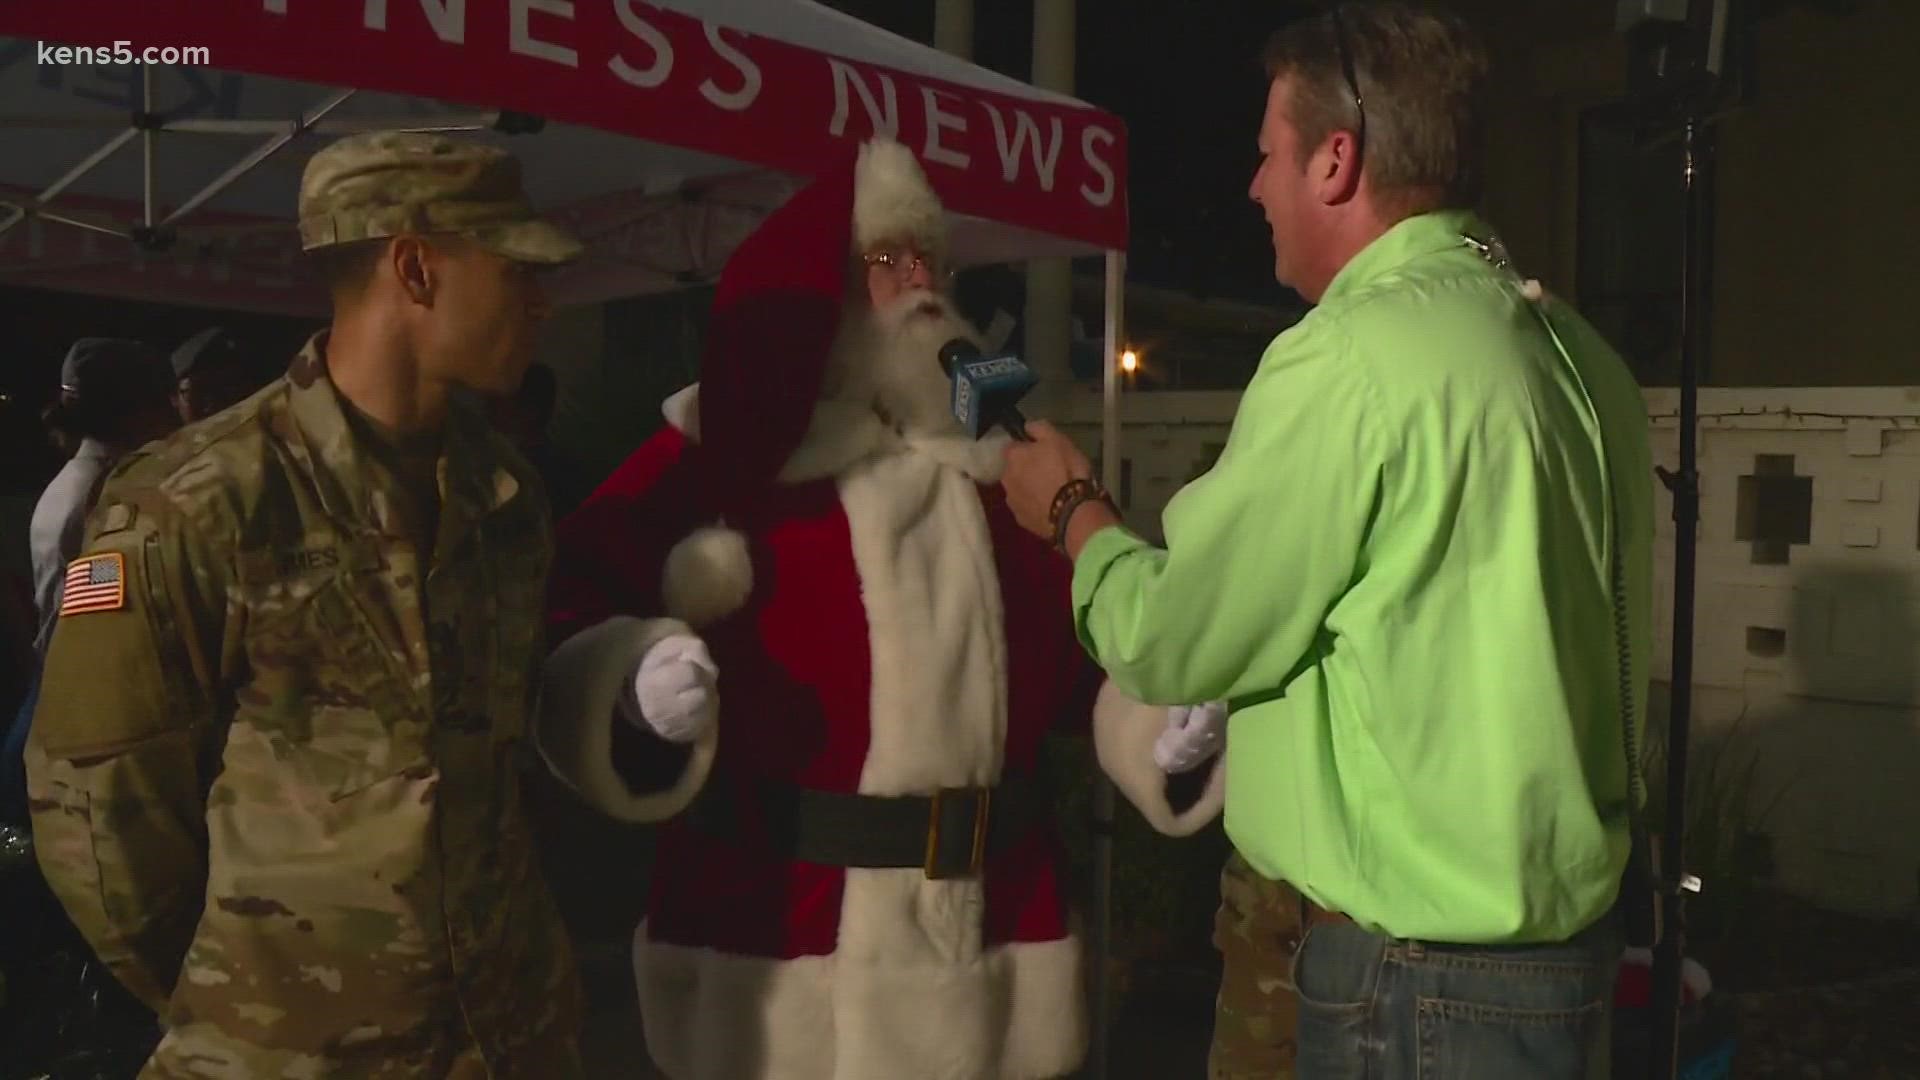 Bill's Elves is working to bring presents and holiday cheer to local children in need.